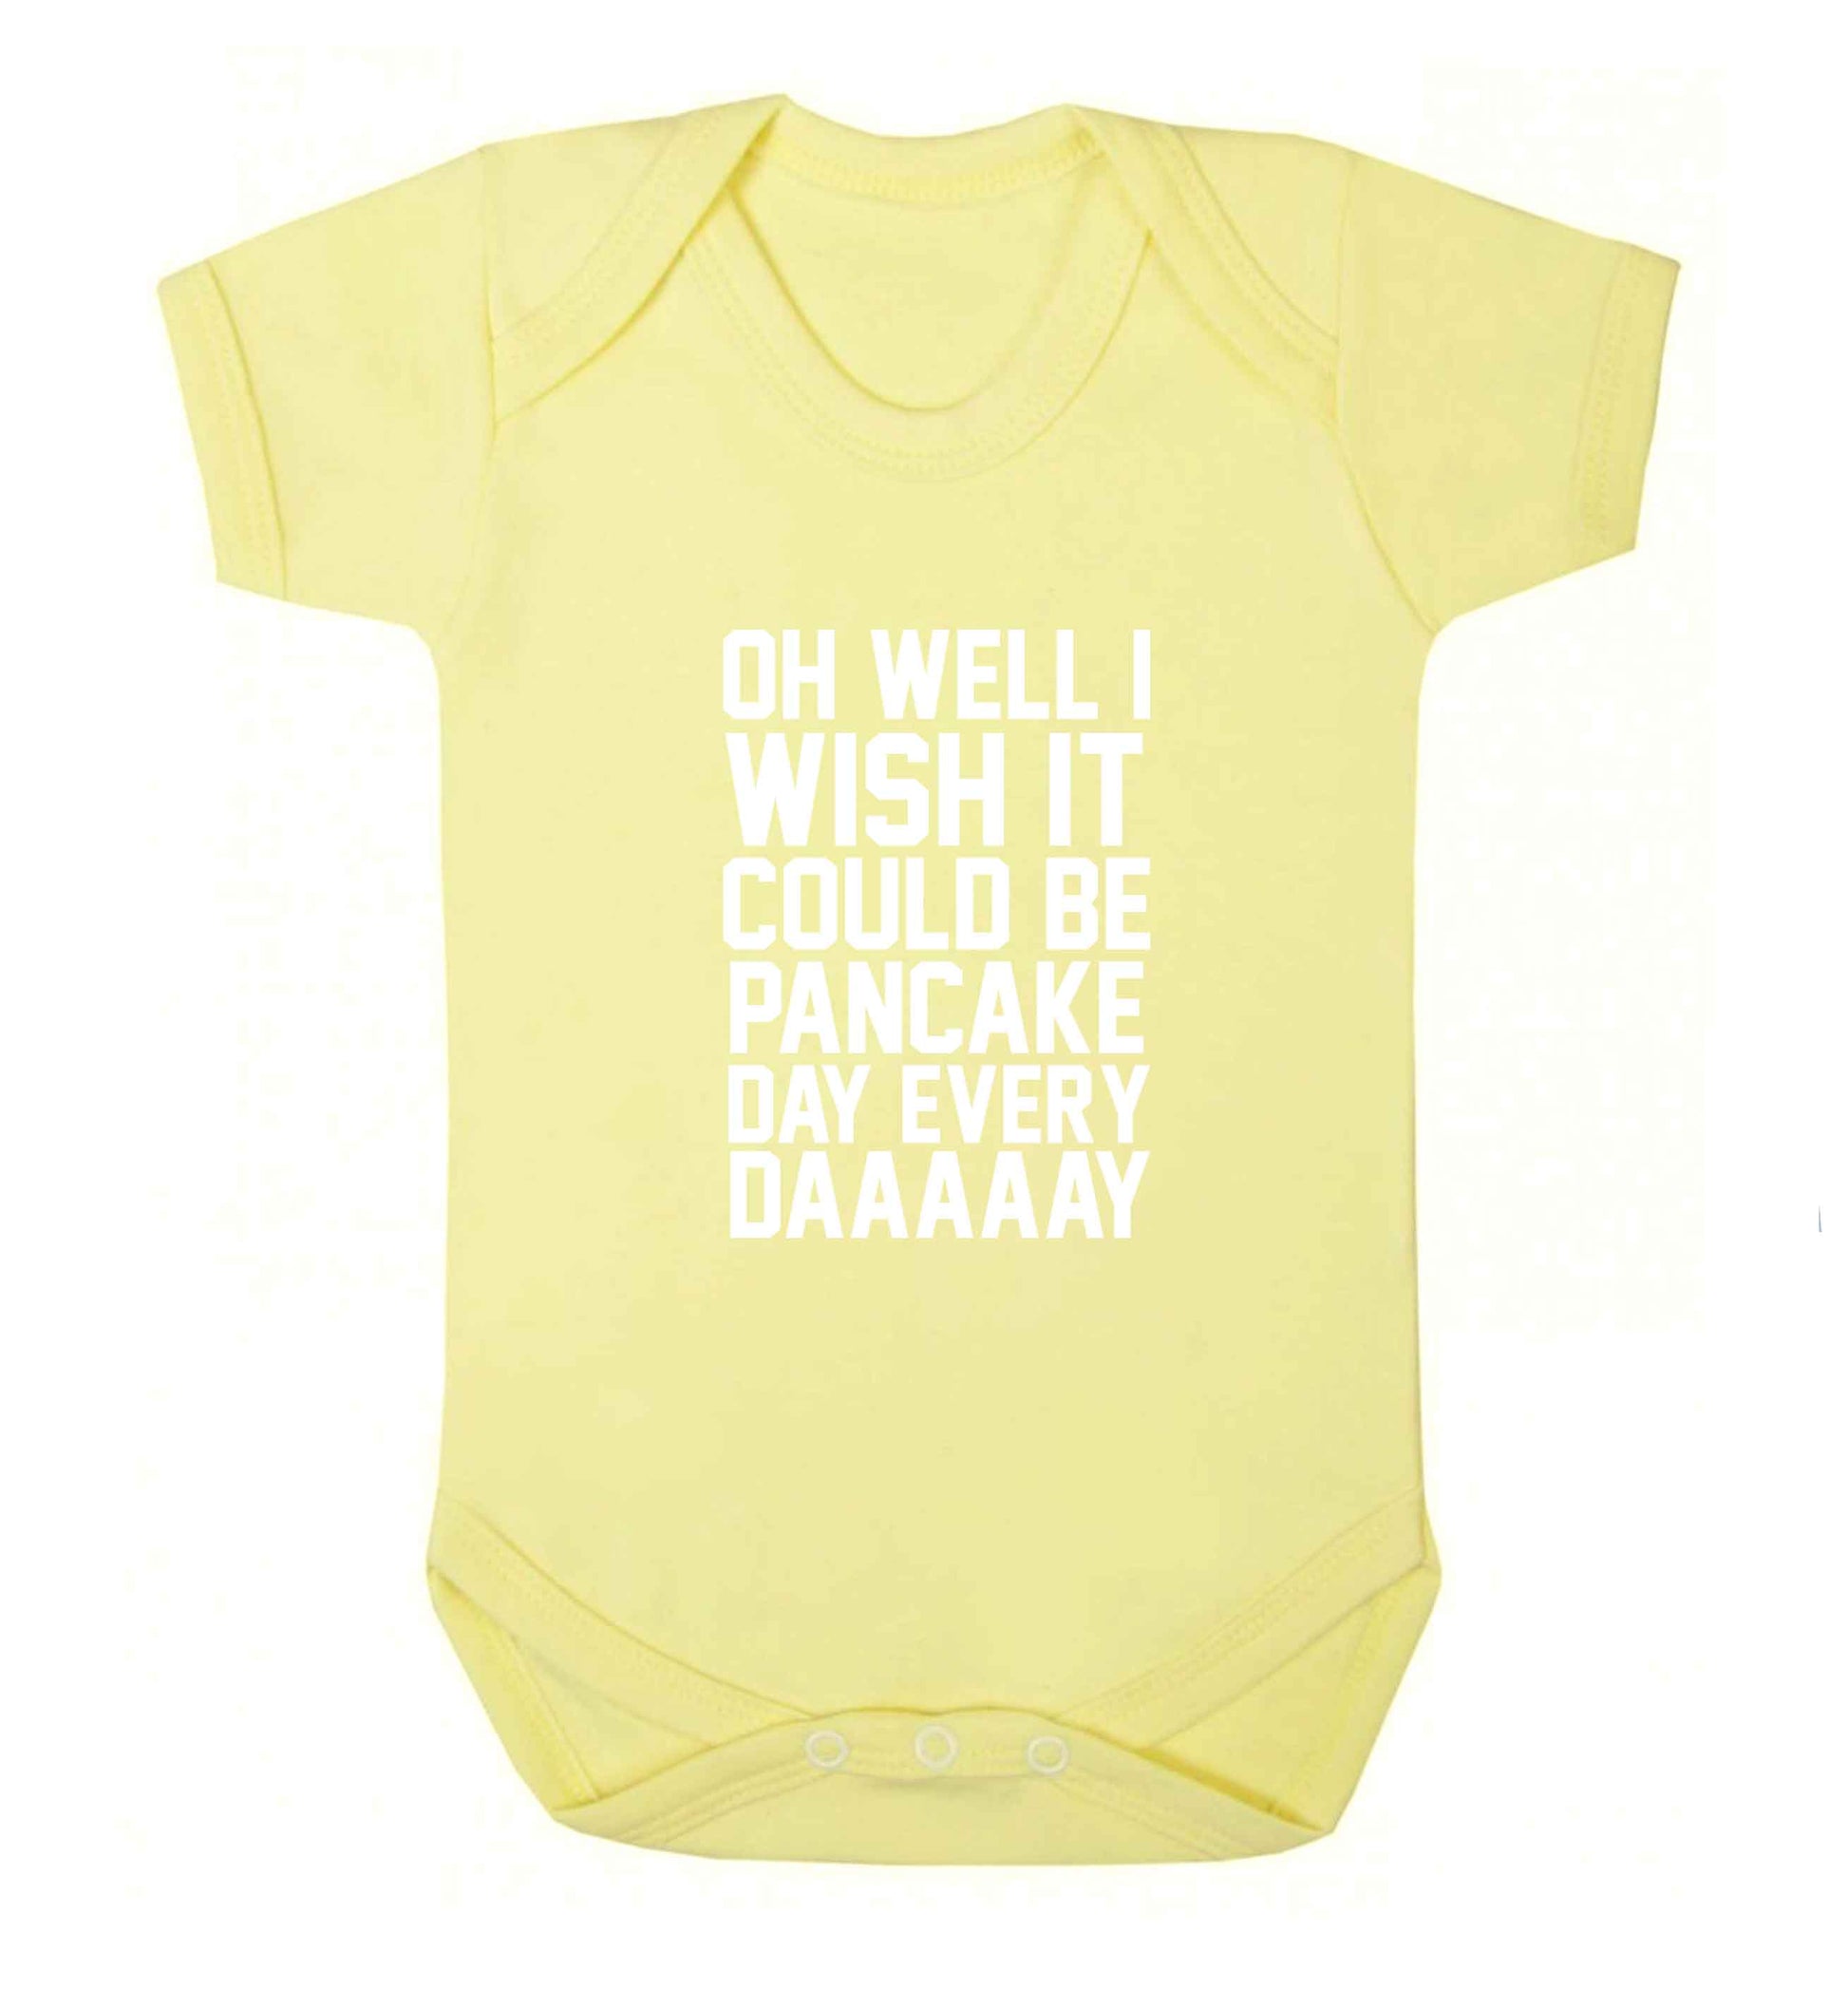 Oh well I wish it could be pancake day every day baby vest pale yellow 18-24 months